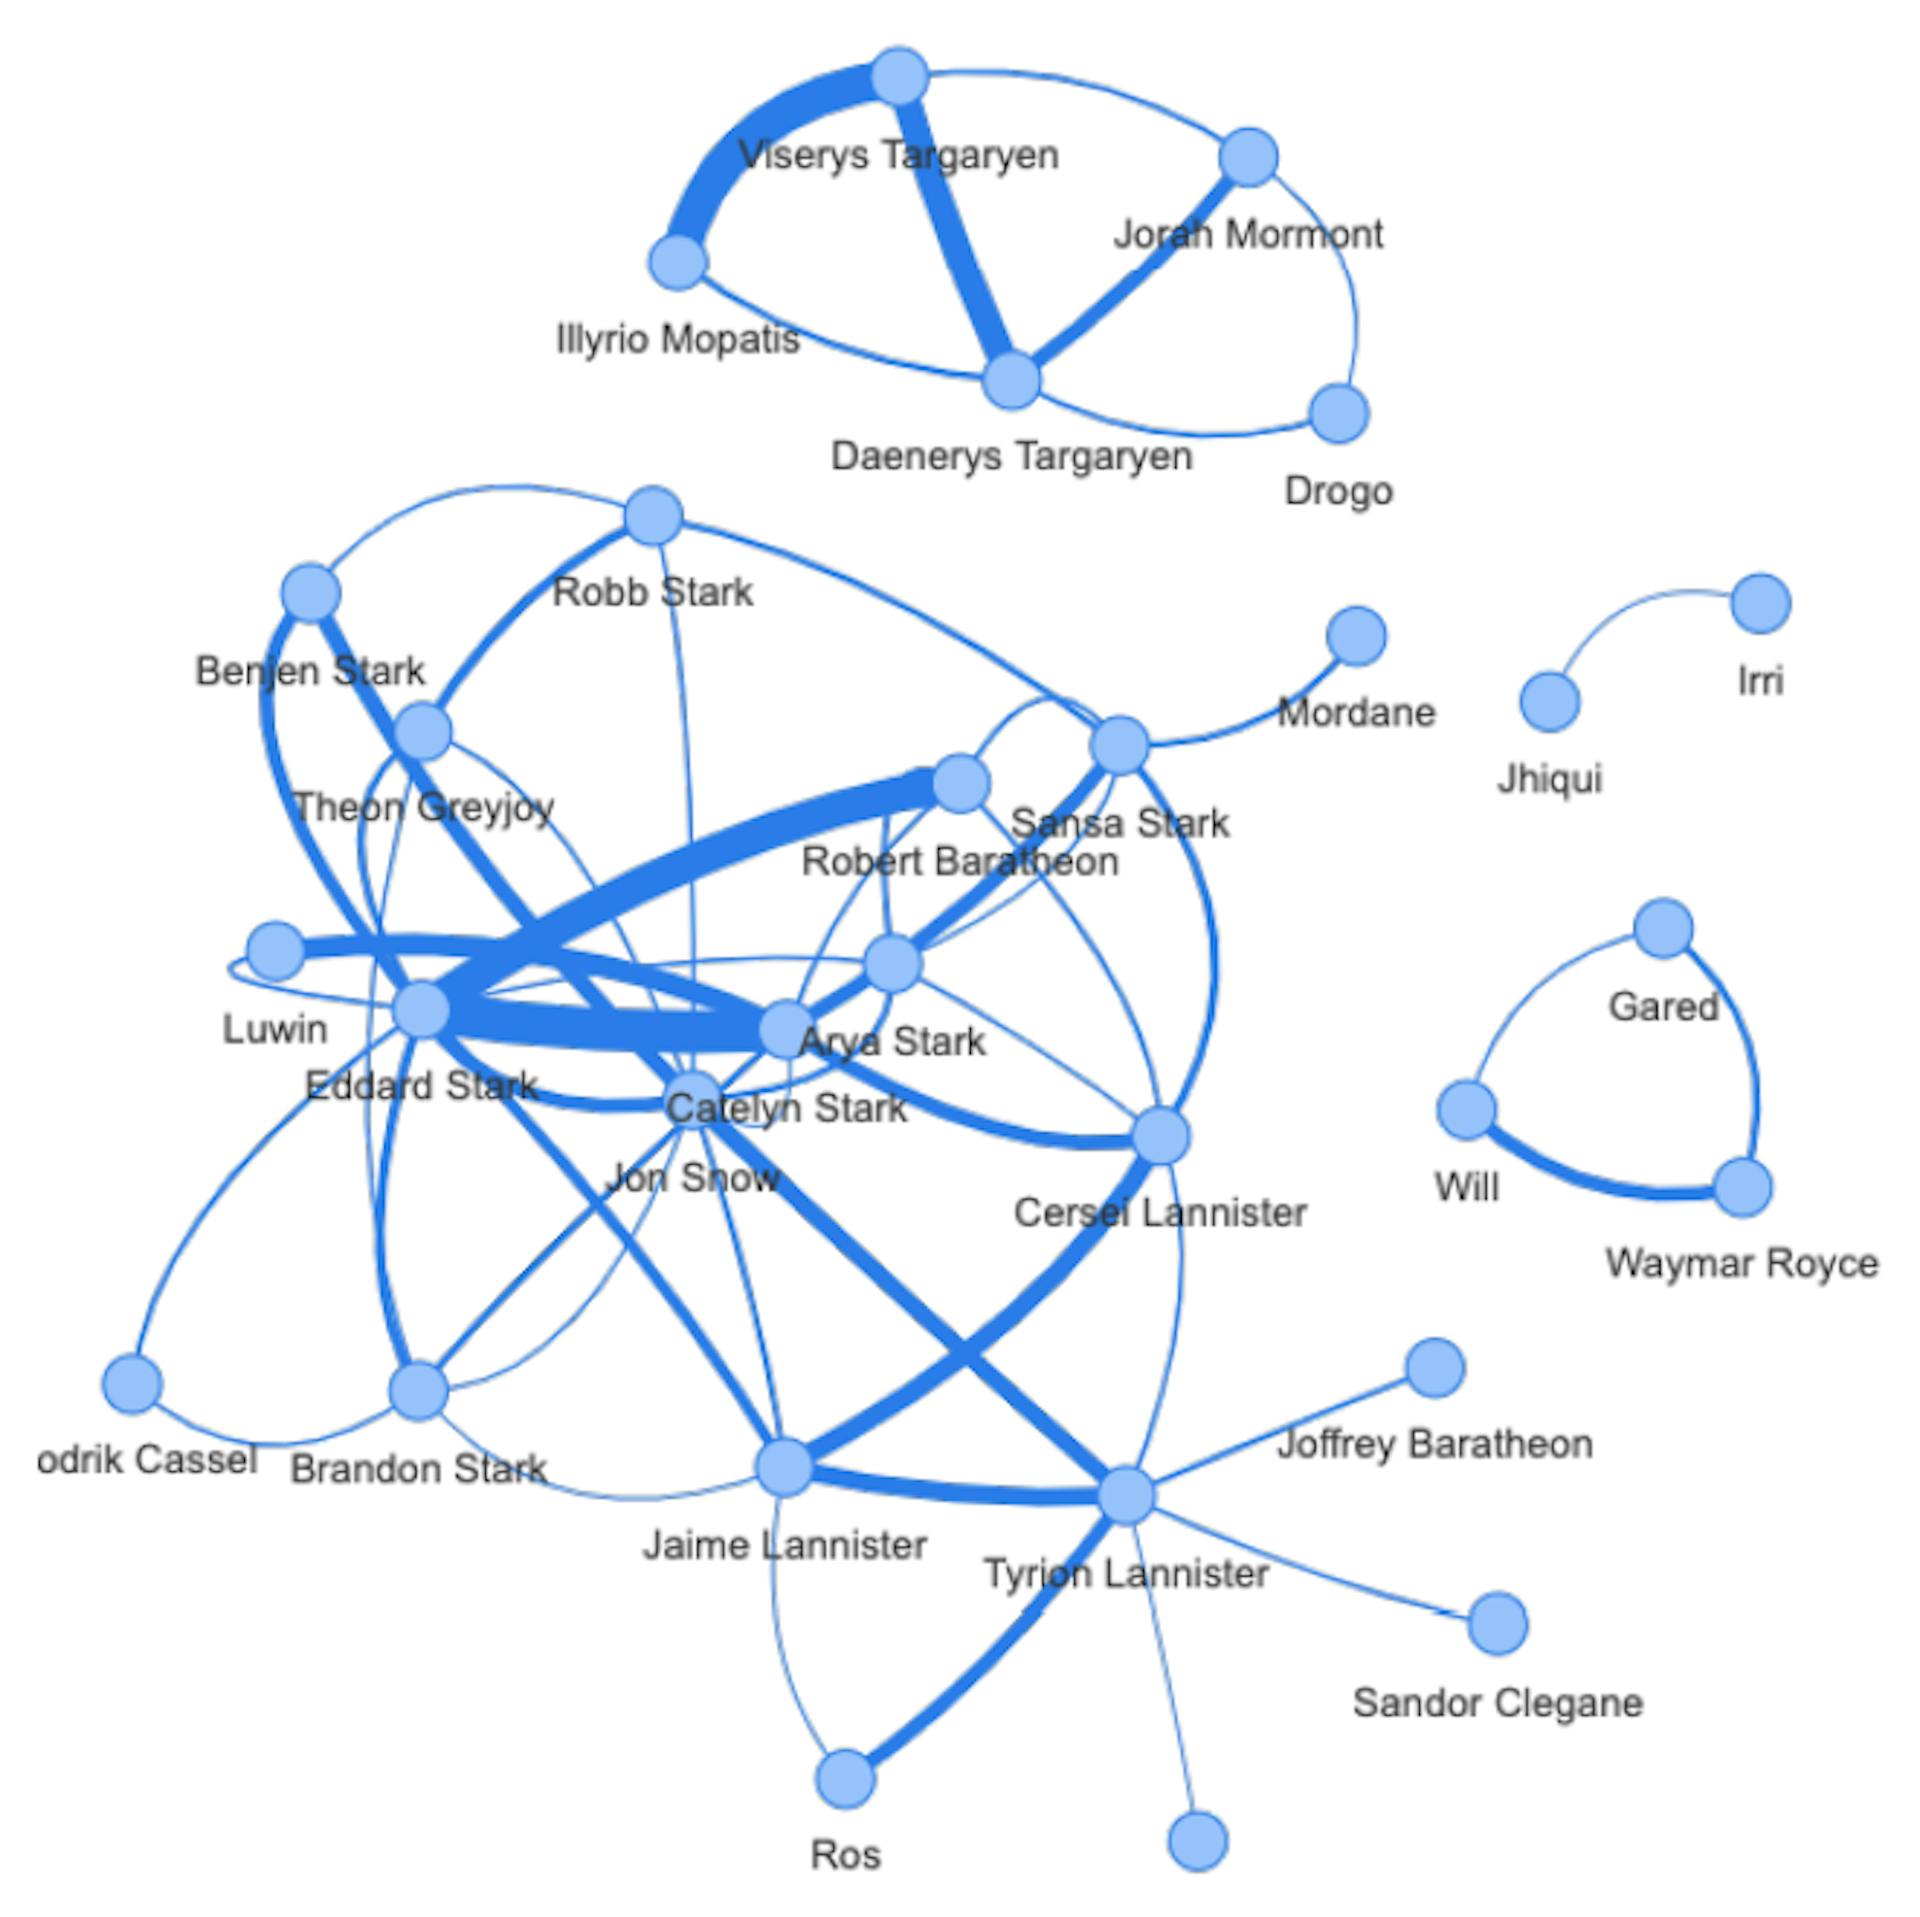 Fig. 3. Game of Throne Season 1, Episode 1, Aggregated Character Network.